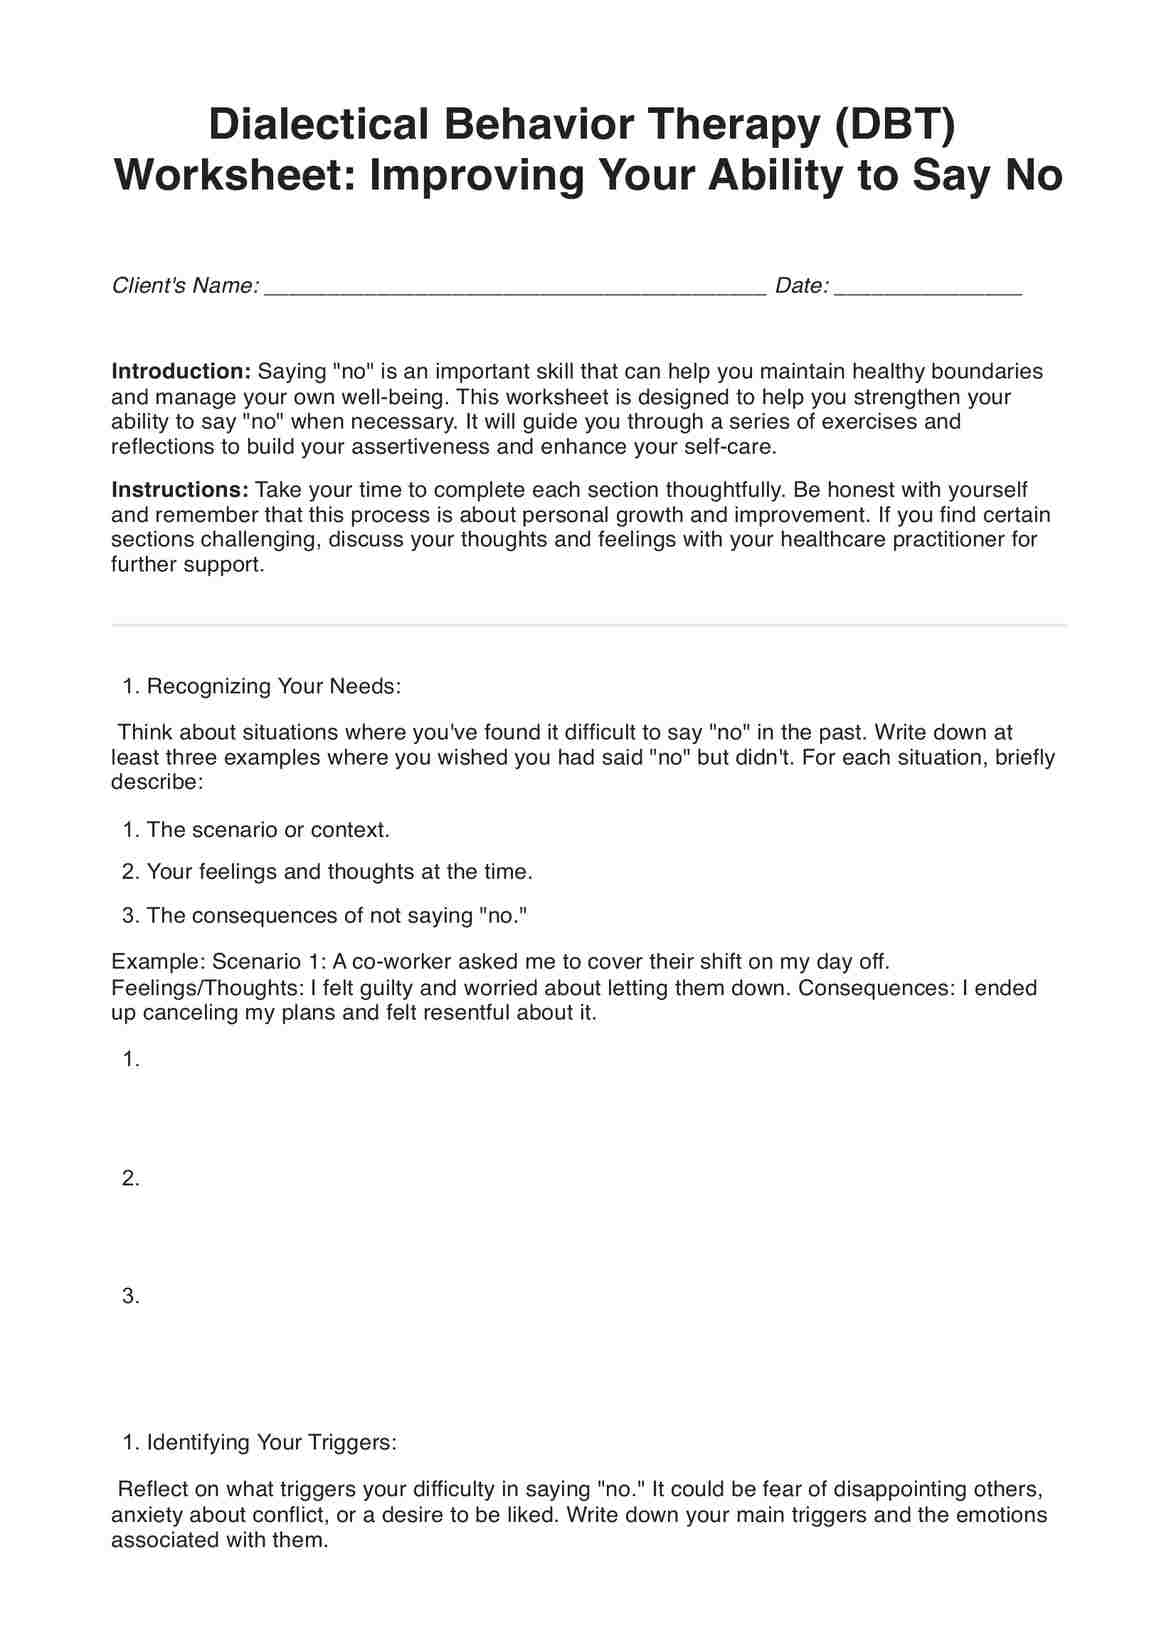 Improving Your Ability to Say No DBT Worksheet PDF Example